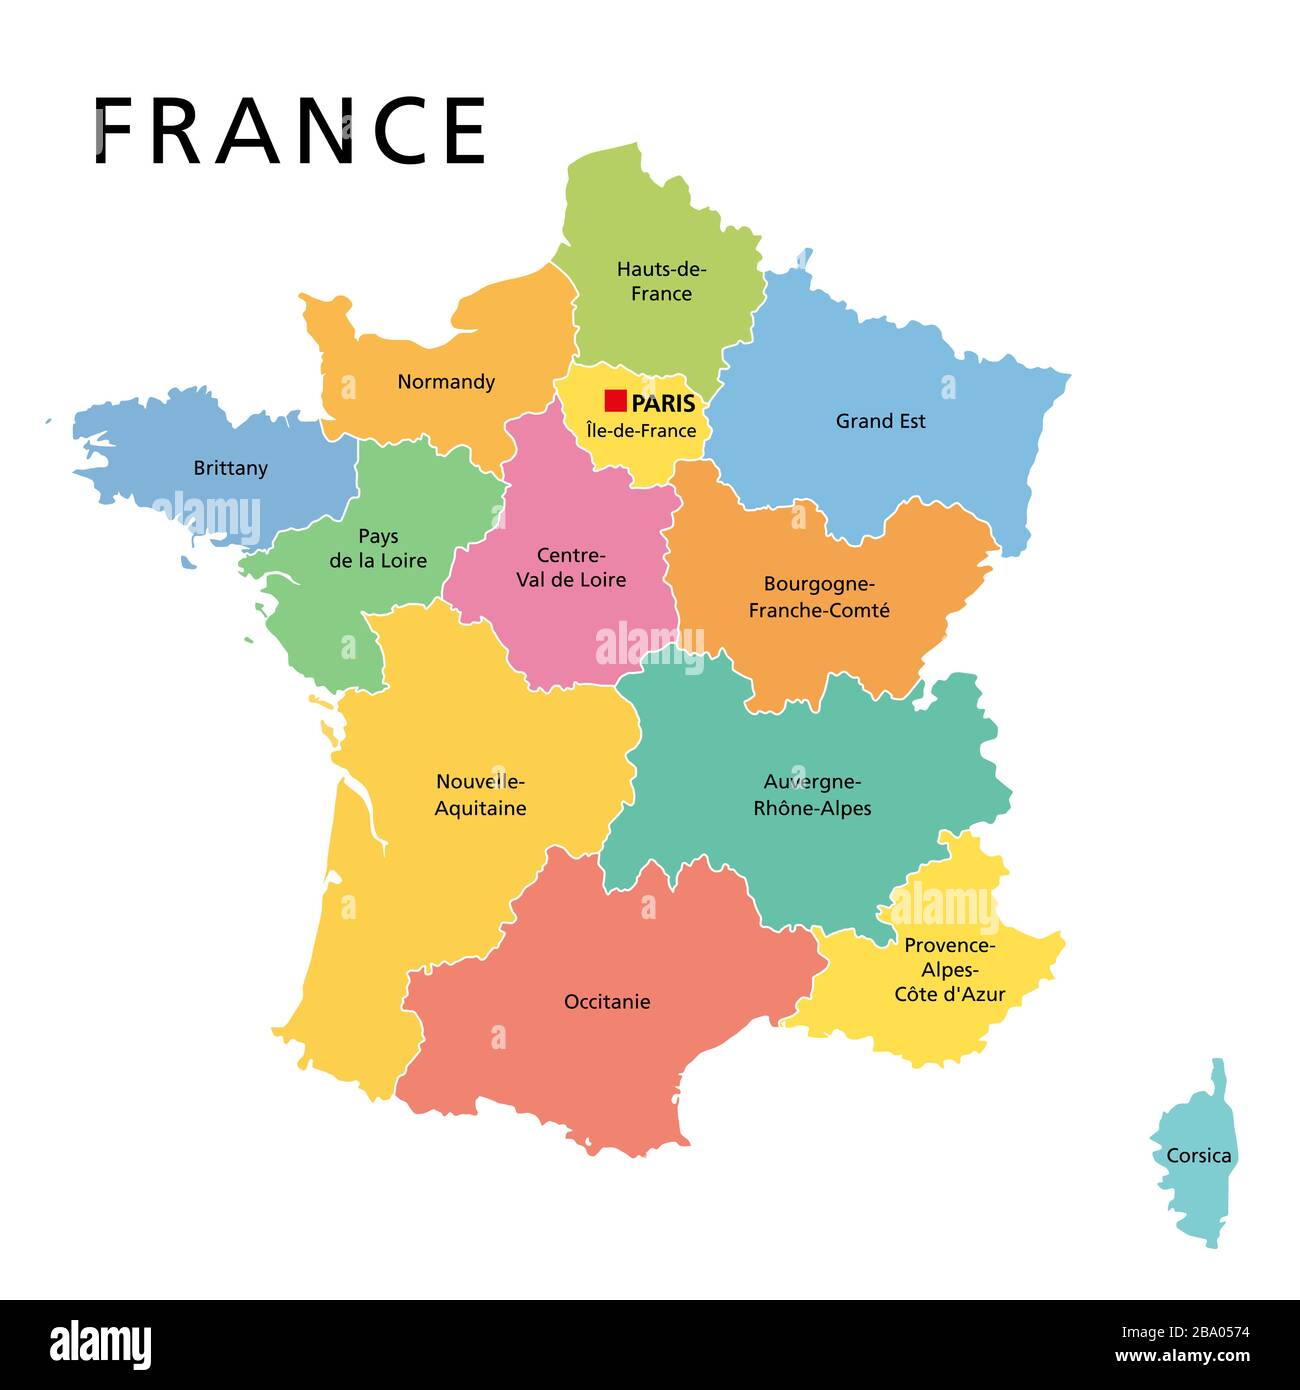 France, political map with multicolored regions of Metropolitan France. French Republic, capital Paris, administrative regions and prefectures. Stock Photo